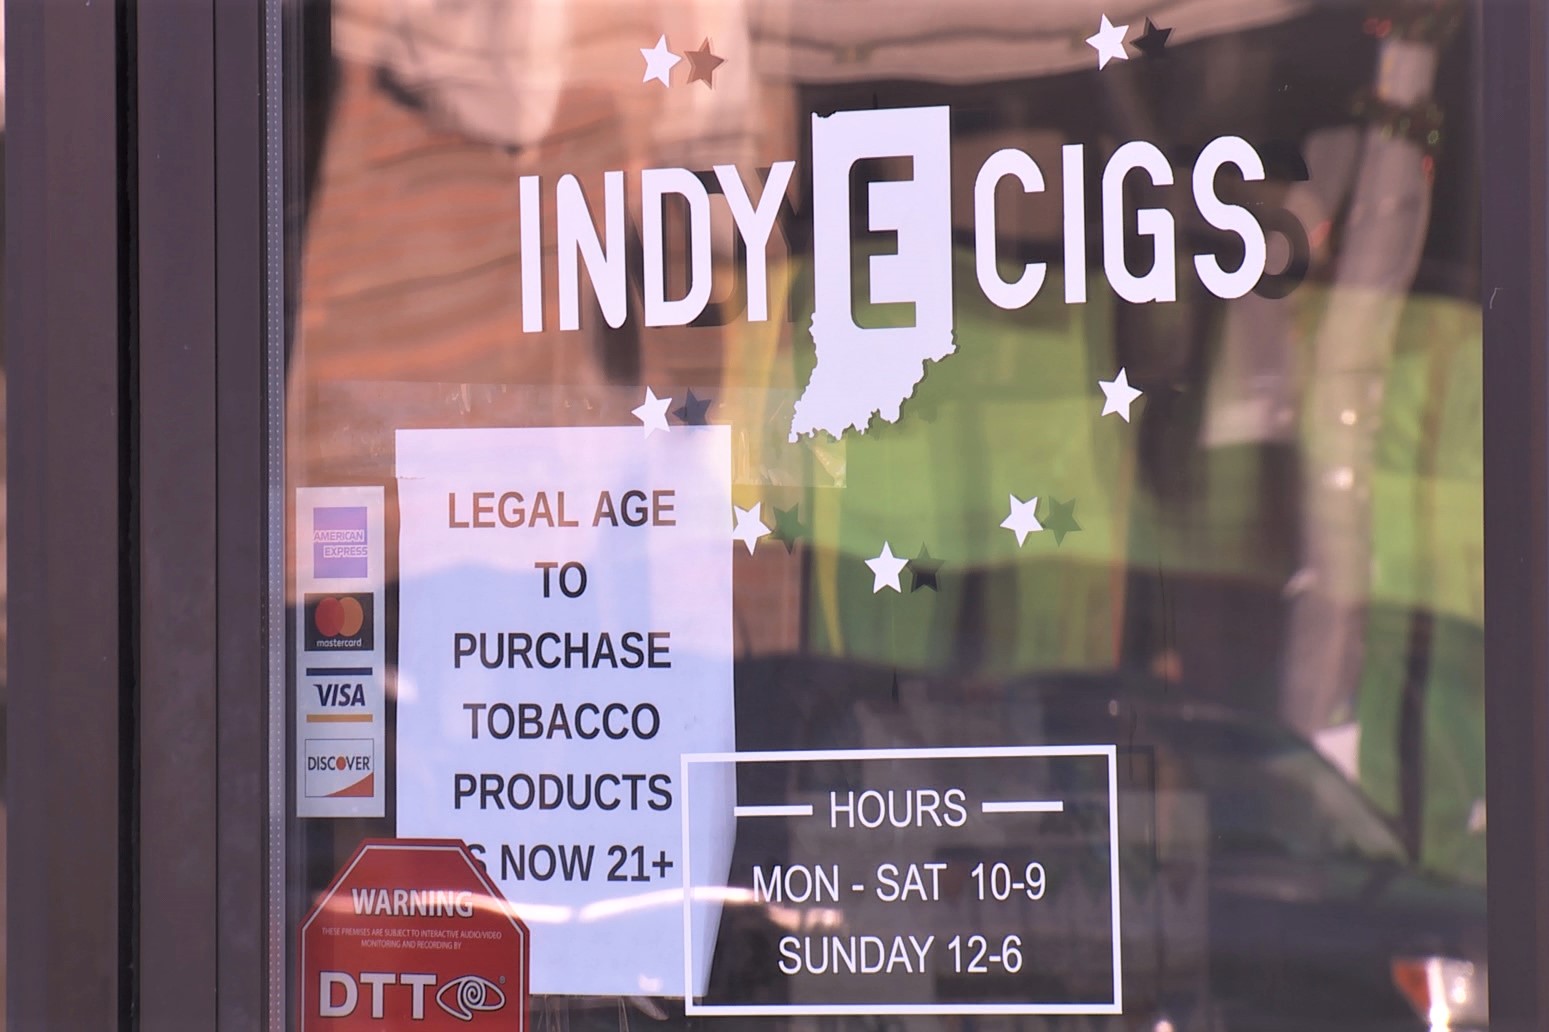 The door of Indy E-Cigs, a smoke and vape shop.